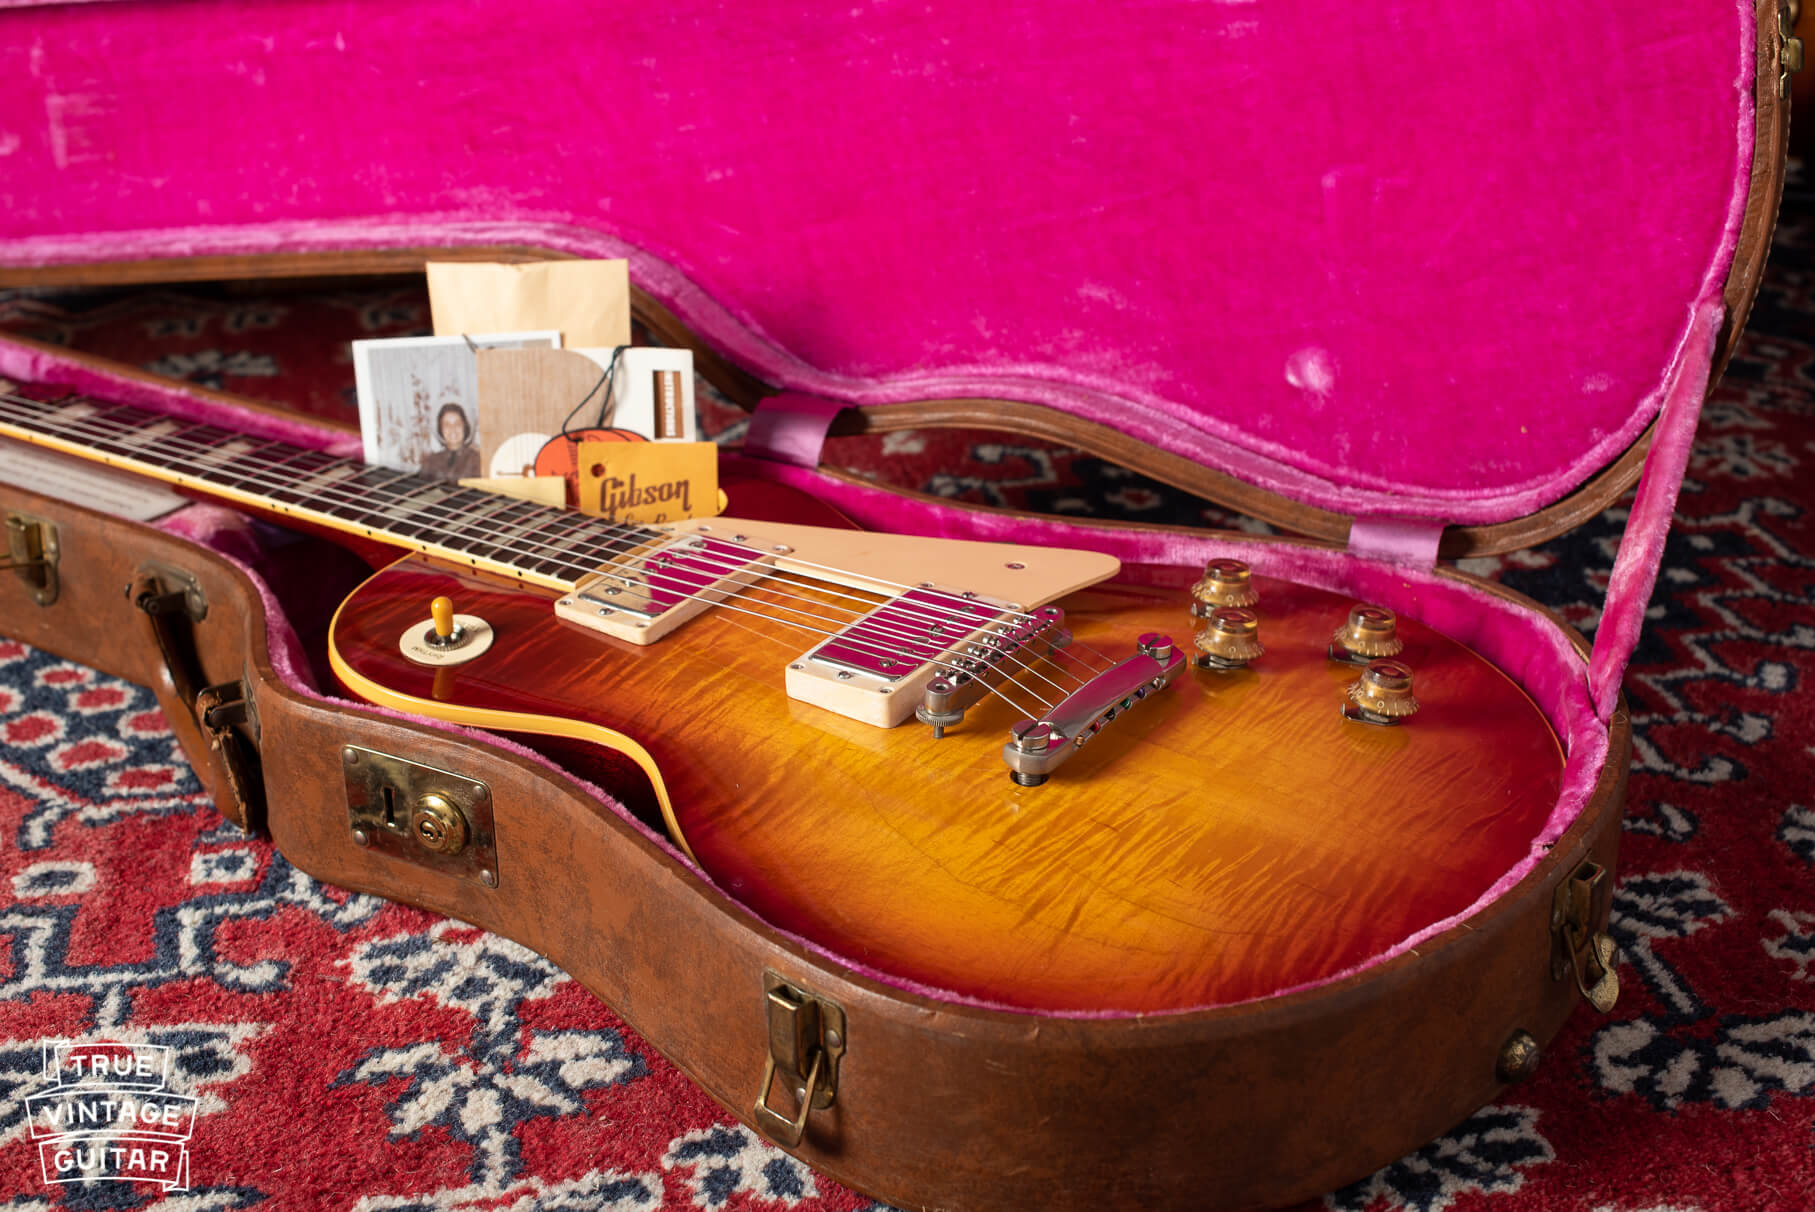 Gibson Les Paul 1960 burst with flame Maple top figure